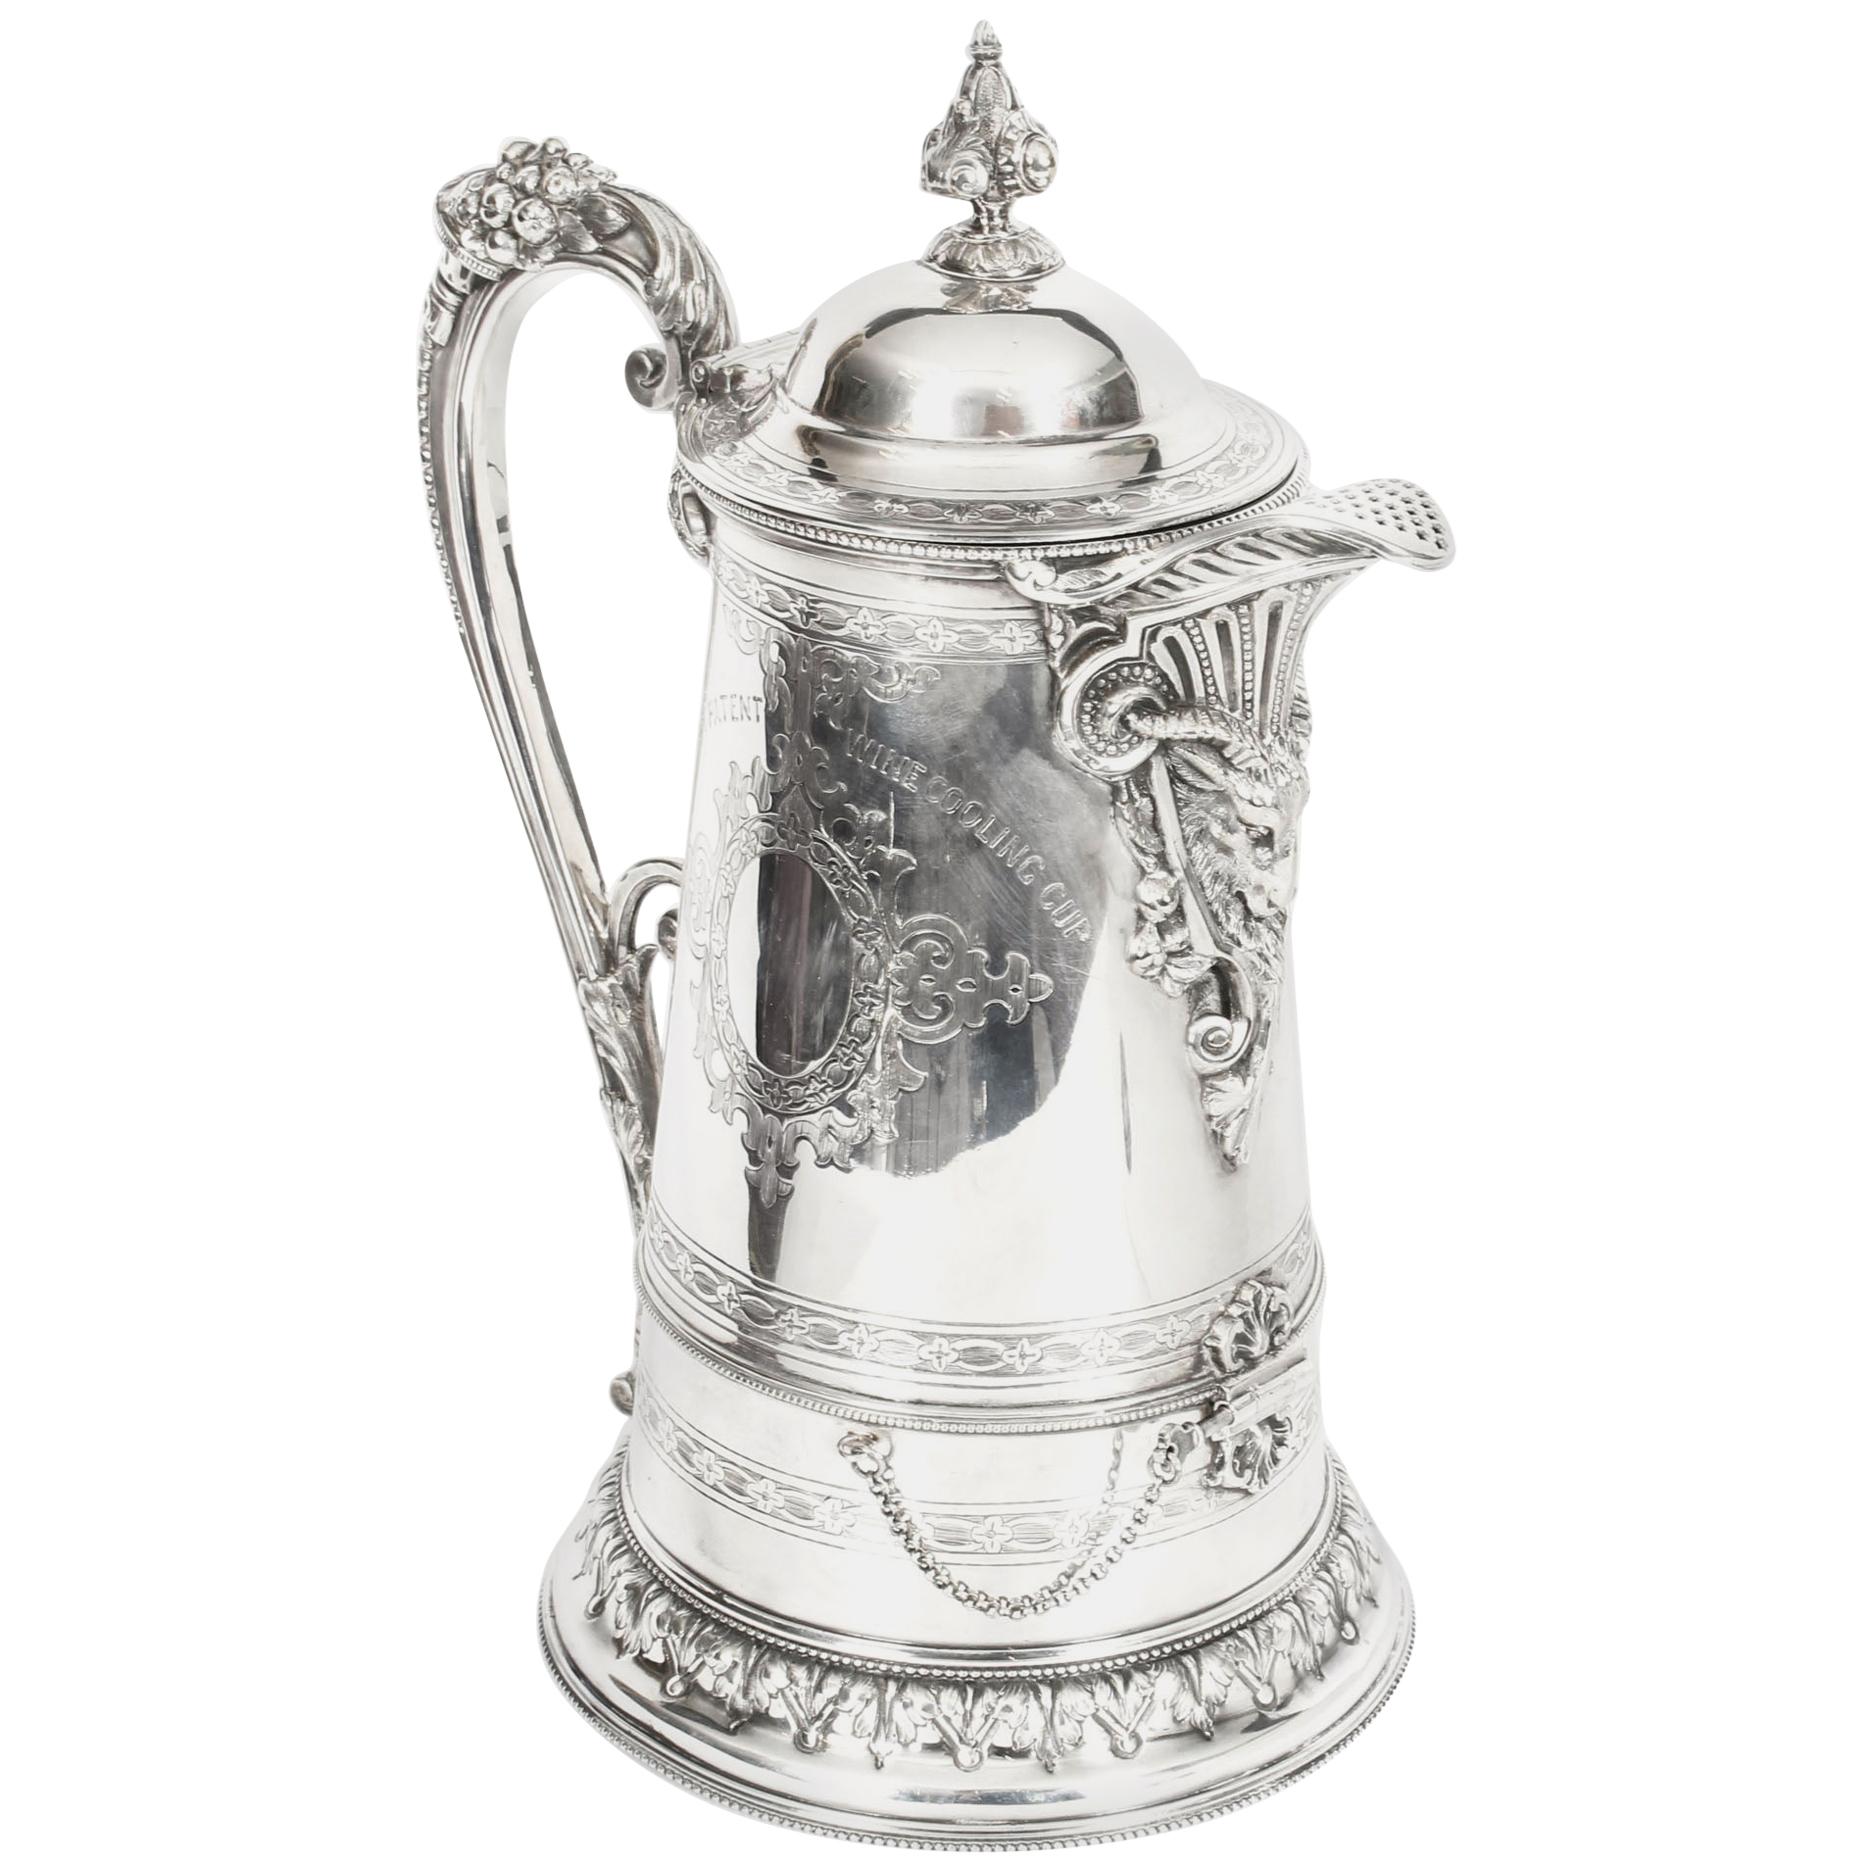 Antique Silver Plate Tudor Patent Wine Cooling Flagon, 19th Century